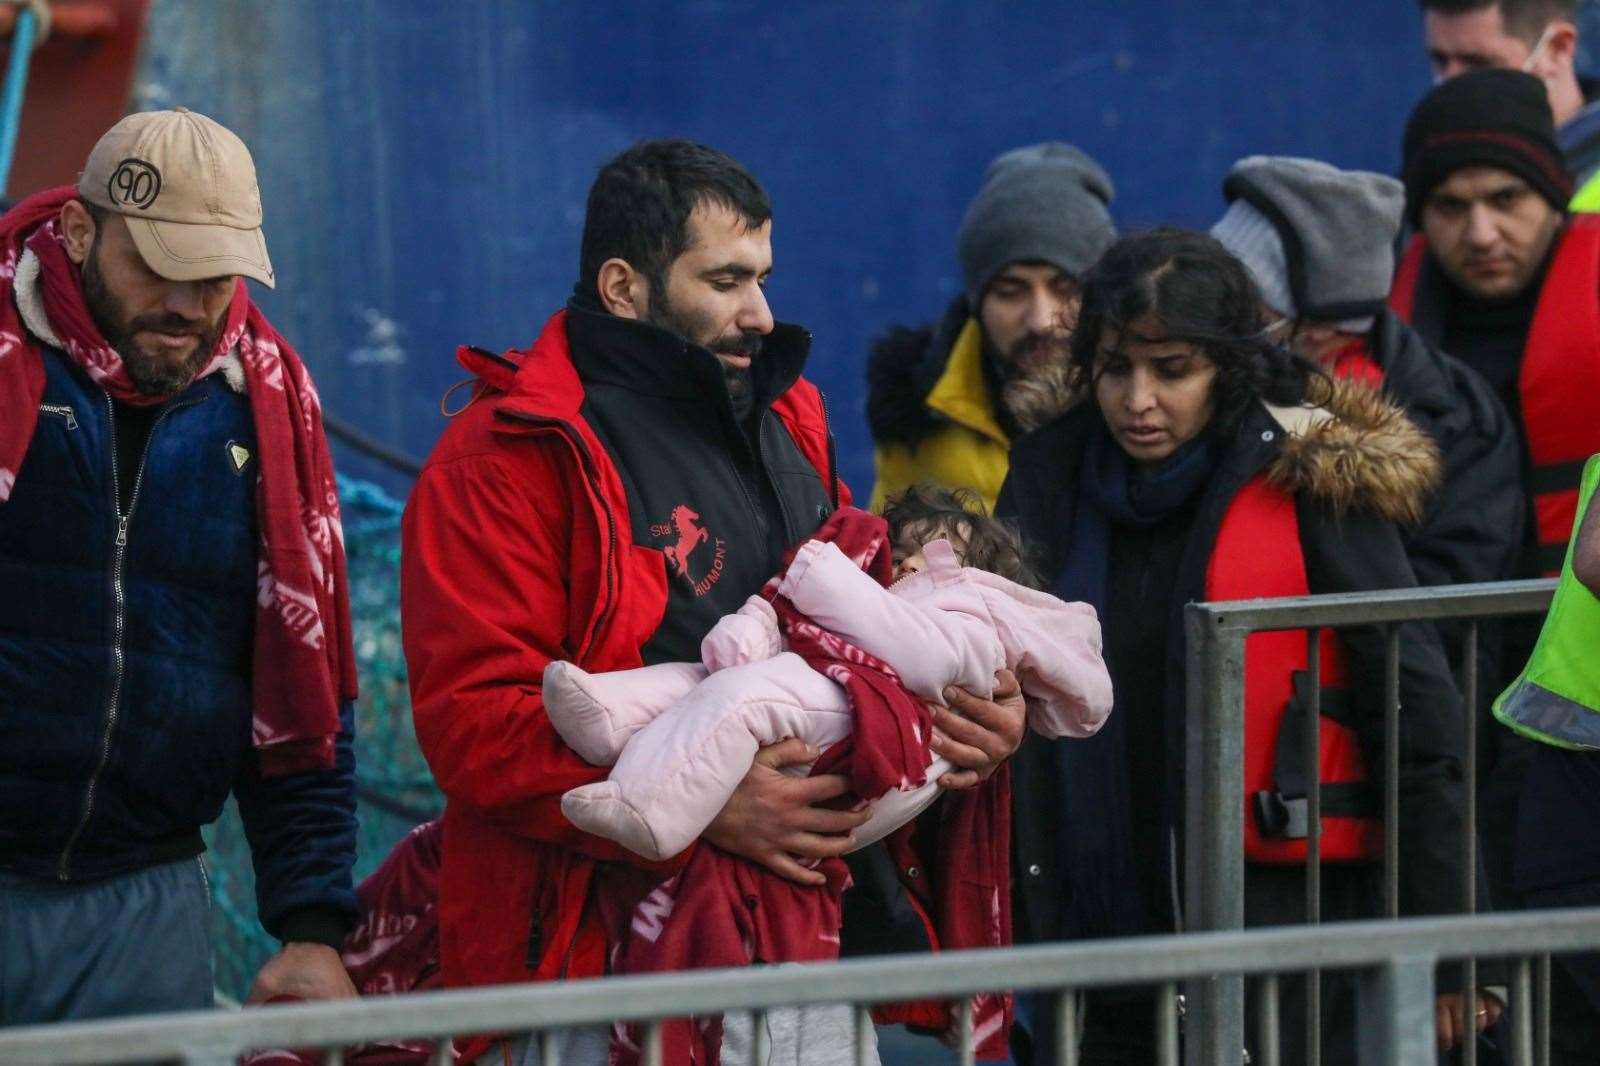 A tiny girl was among a group of asylum seekers brought in Picture: UKNIP